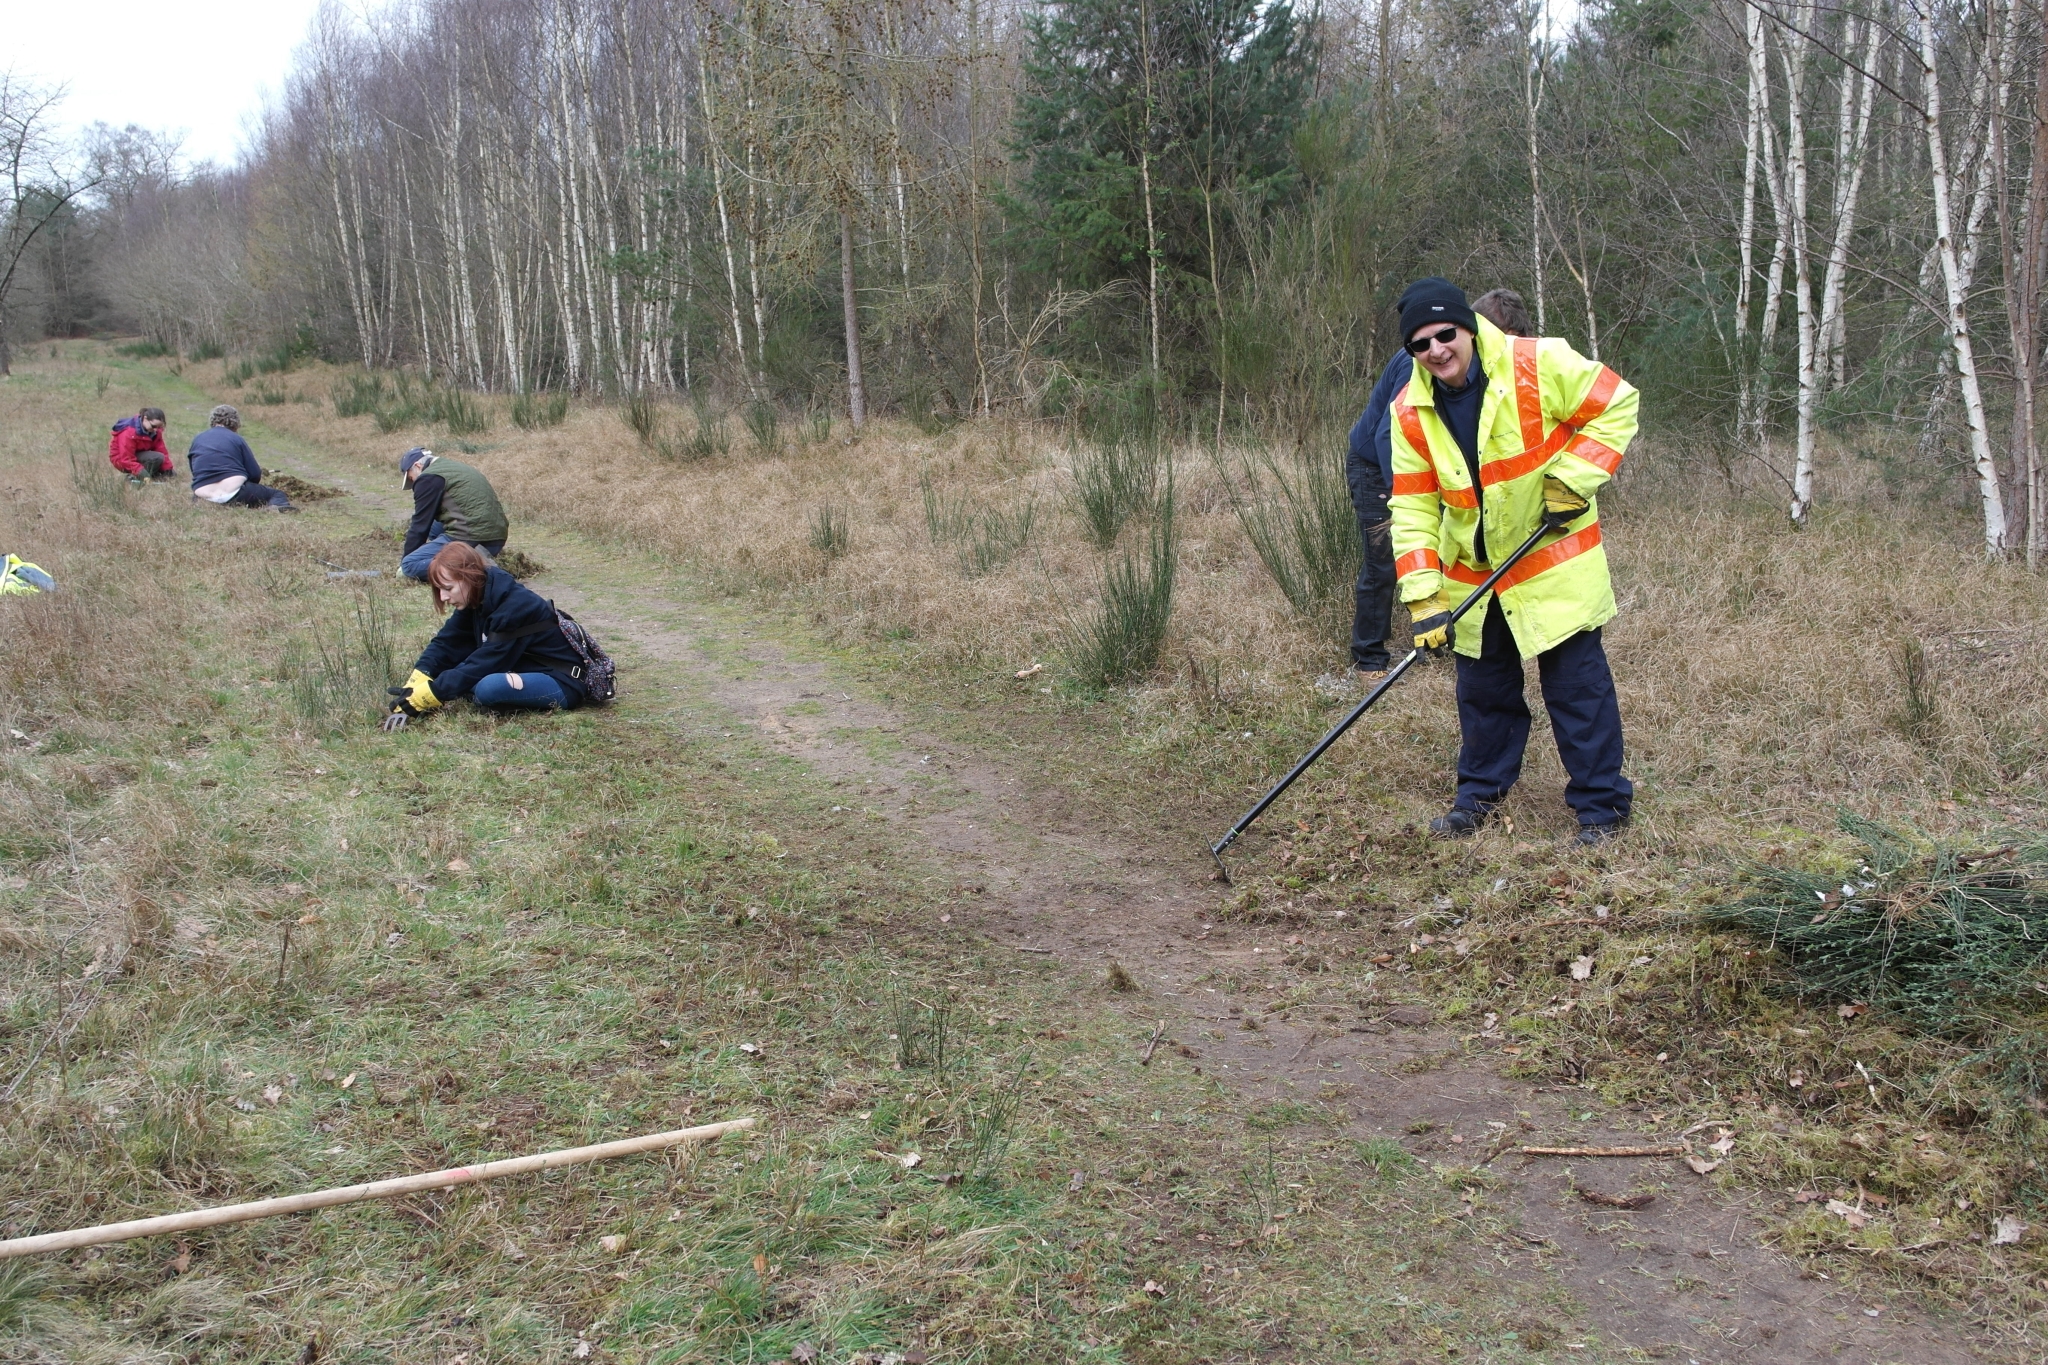 A photo from the FoTF Conservation Event - March 2020 - Habitat Improvement at Quakers Walk, Mildenhall Woods : Some volunteers at work improving the habitat